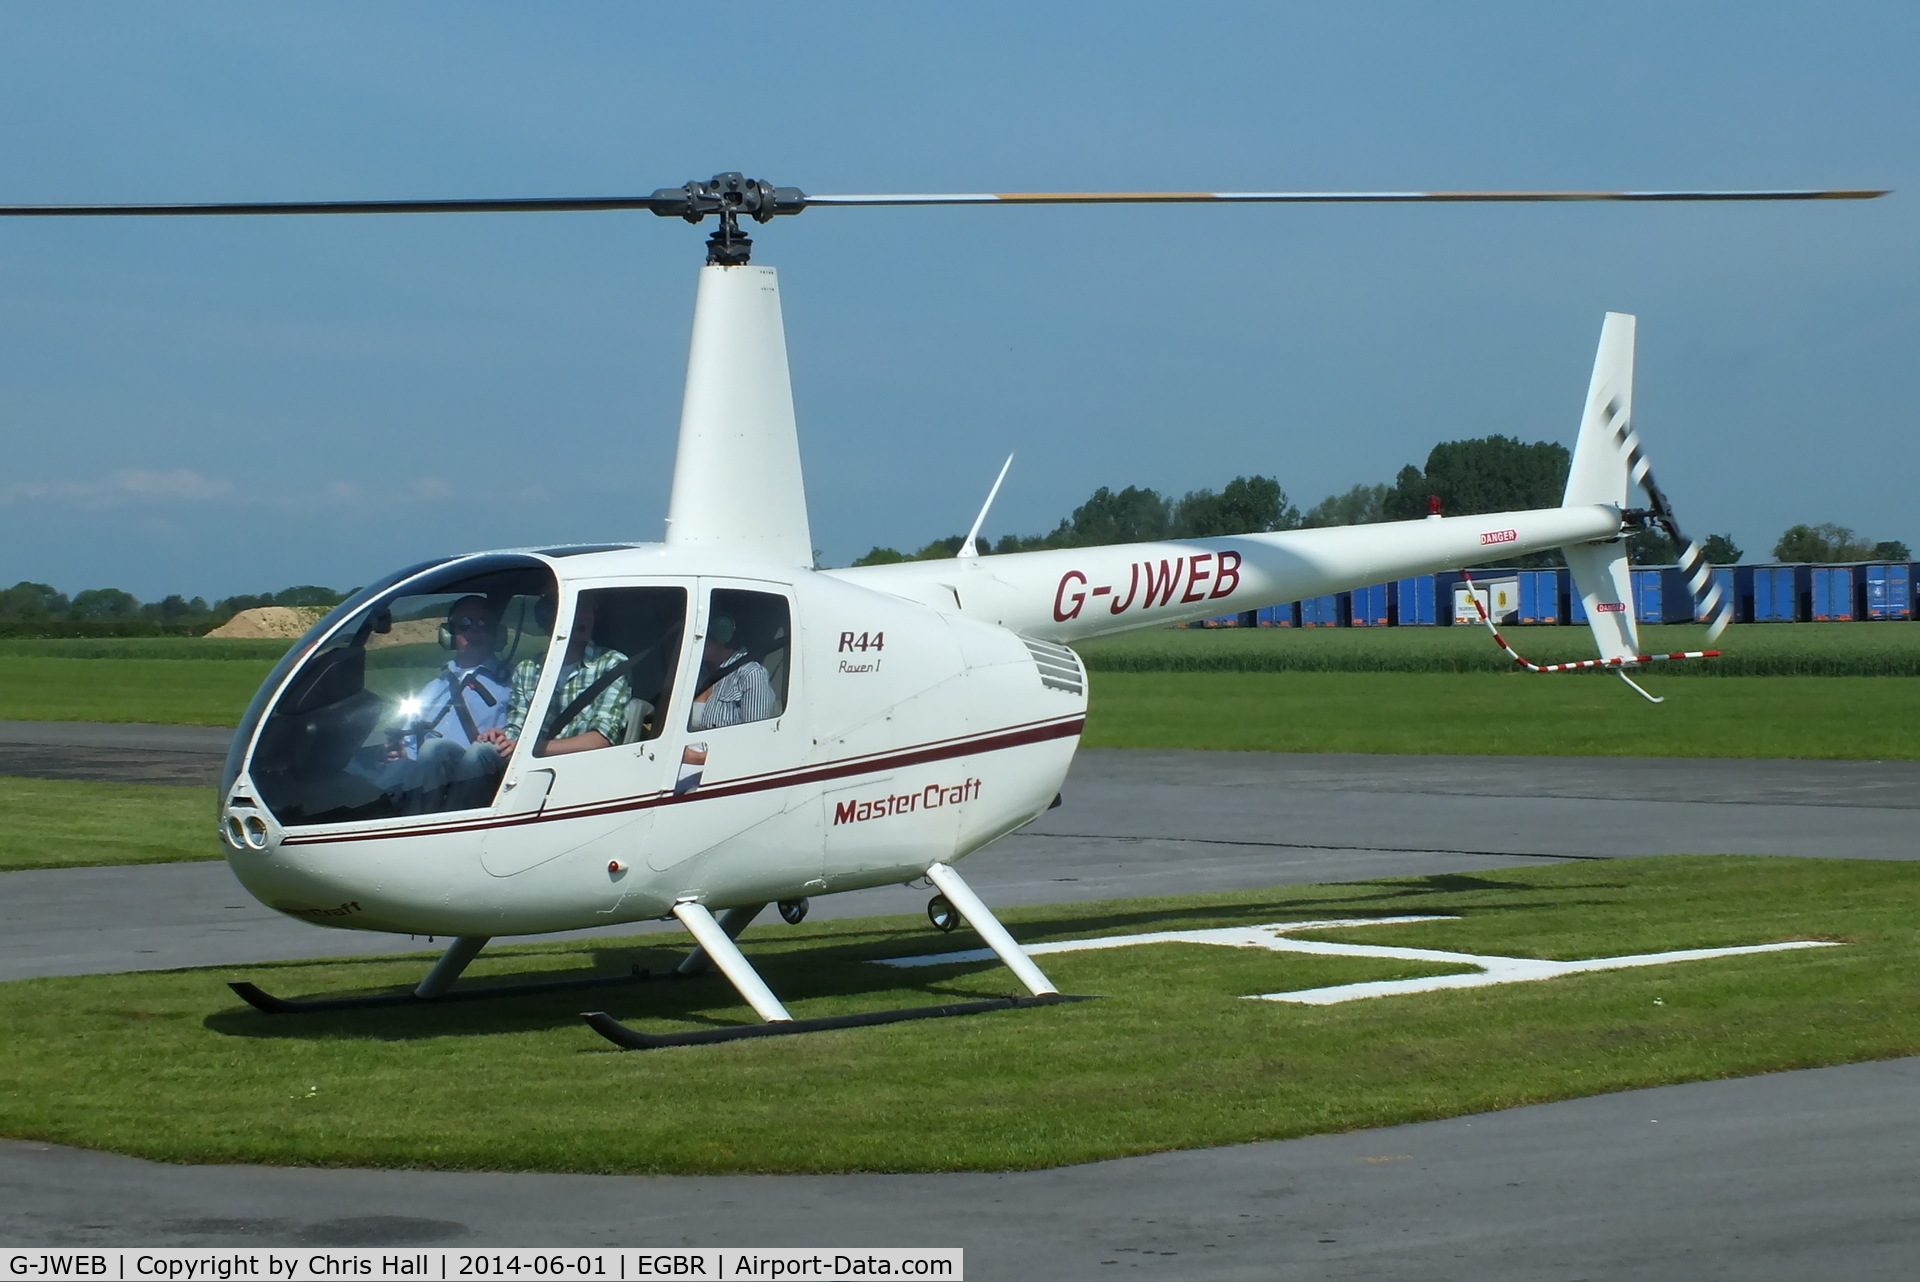 G-JWEB, 2003 Robinson R44 Raven C/N 1334, at Breighton's Open Cockpit & Biplane Fly-in, 2014